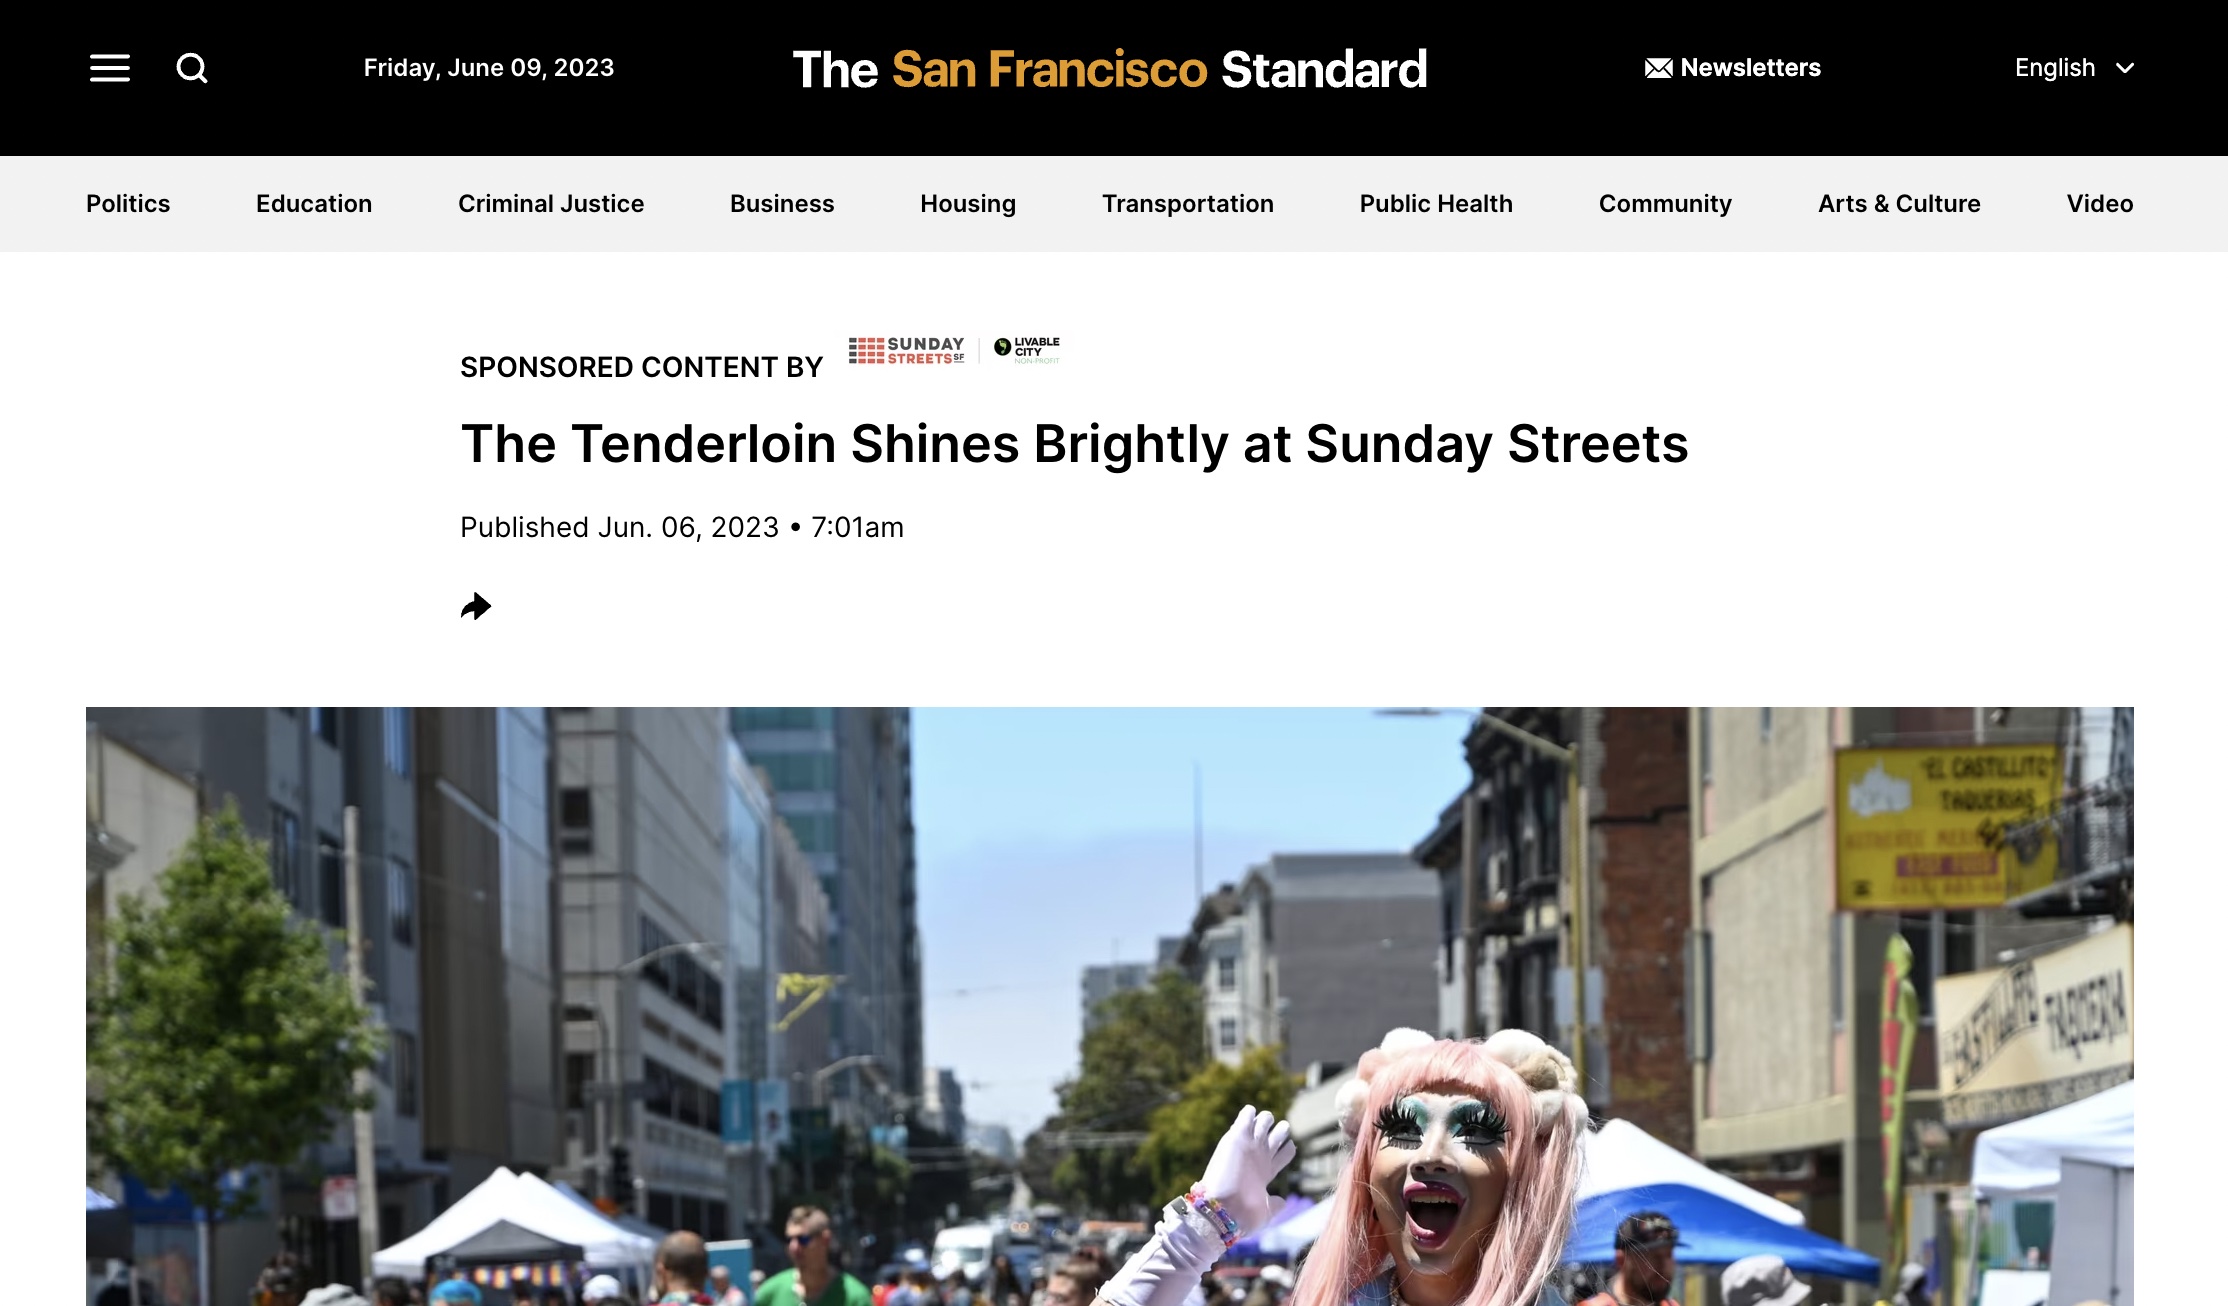 SF Standard: The Tenderloin Shines Brightly at Sunday Streets